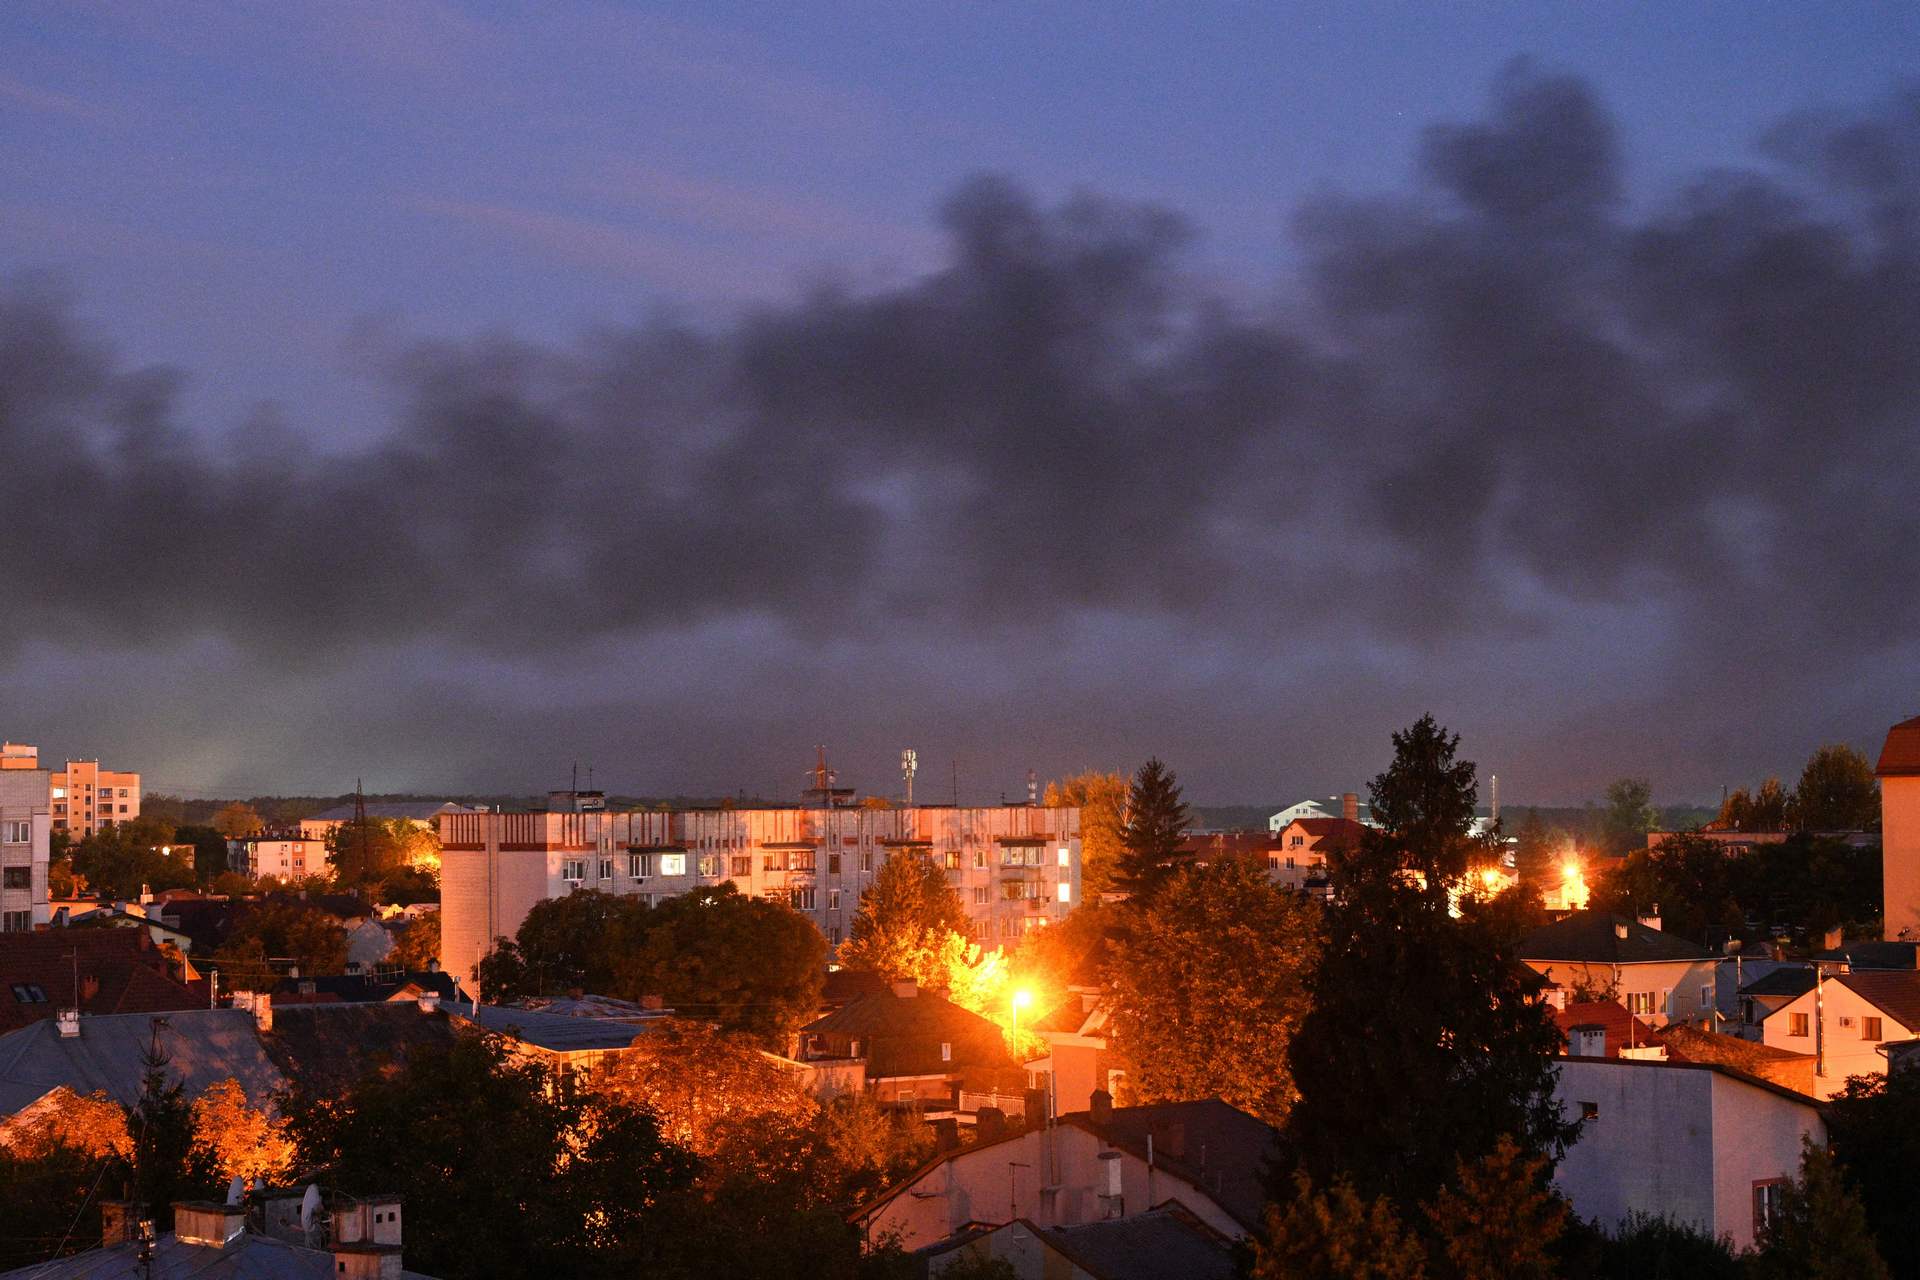 Black smoke billows over the city after drone strikes in the western Ukrainian city of Lviv